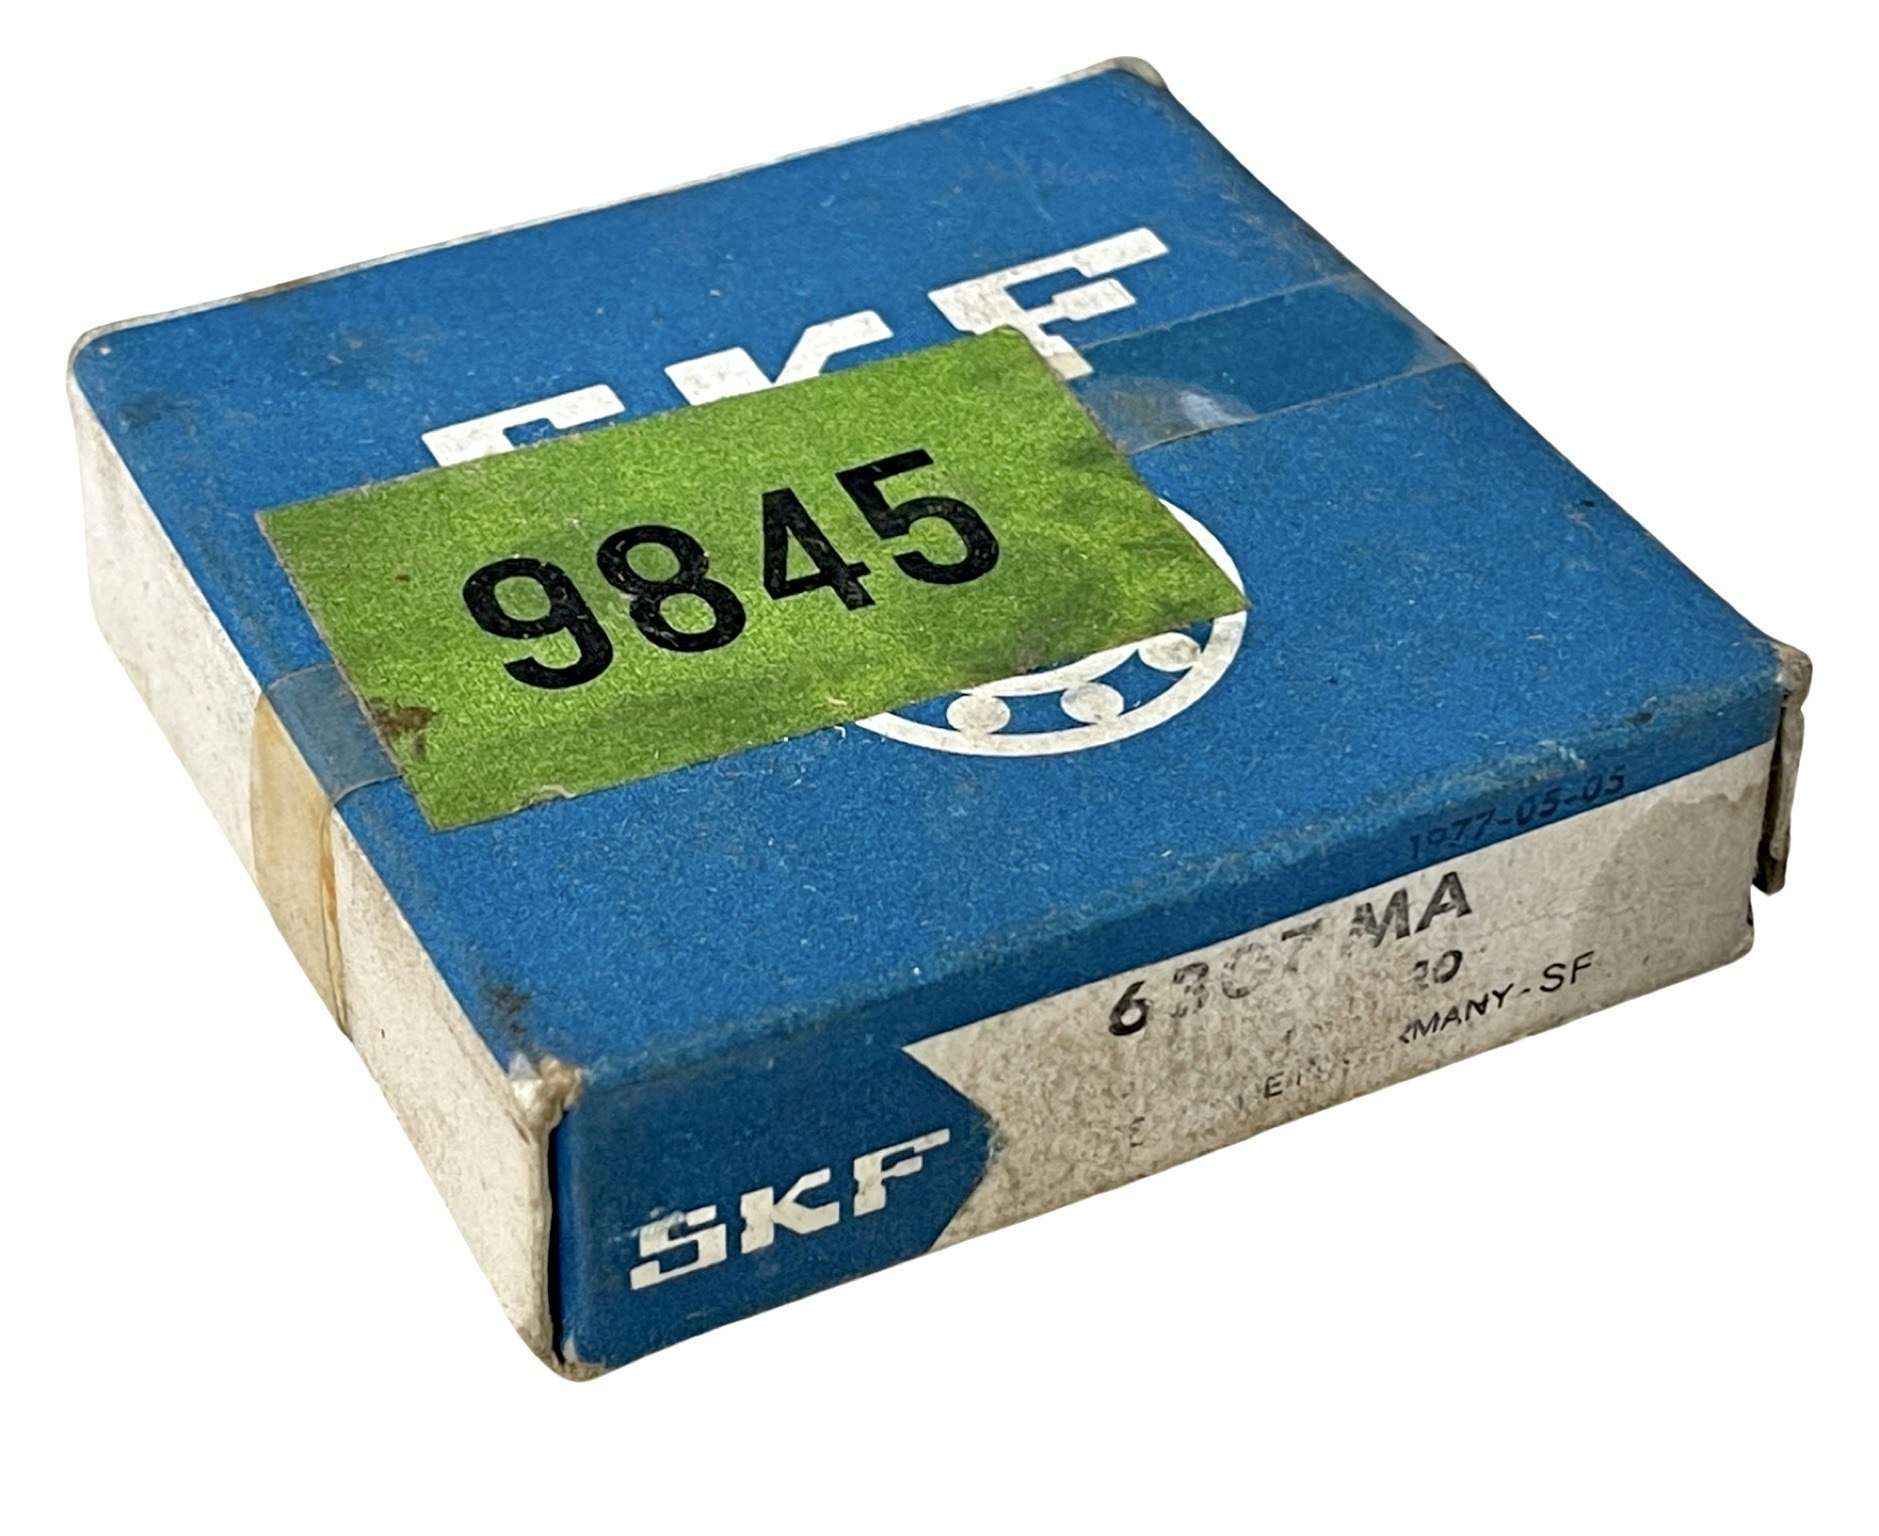 SKF 6307 MA Kullager, West Germany